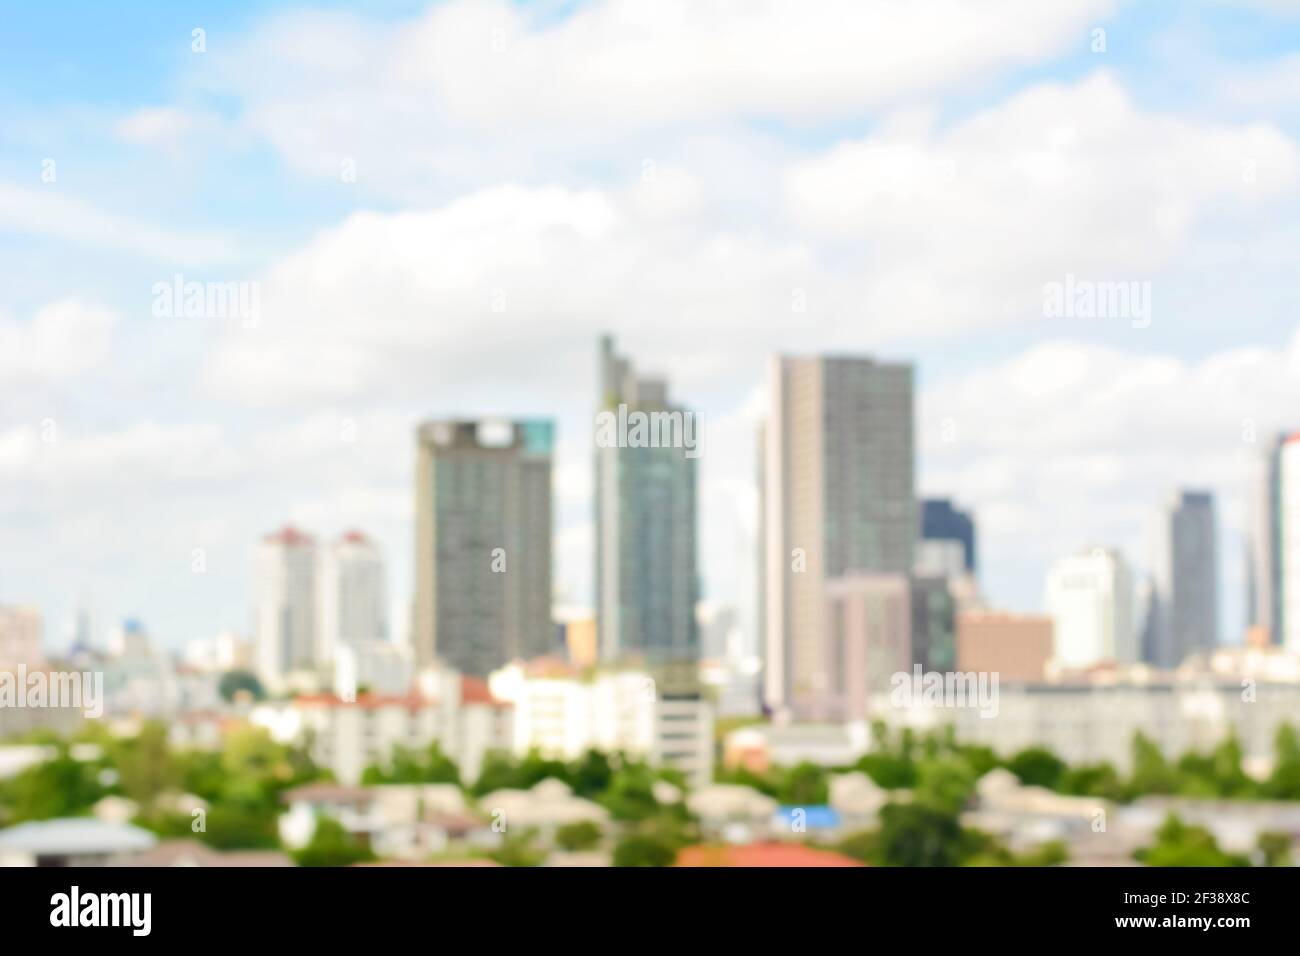 Blurred buildings in the city for background Stock Photo